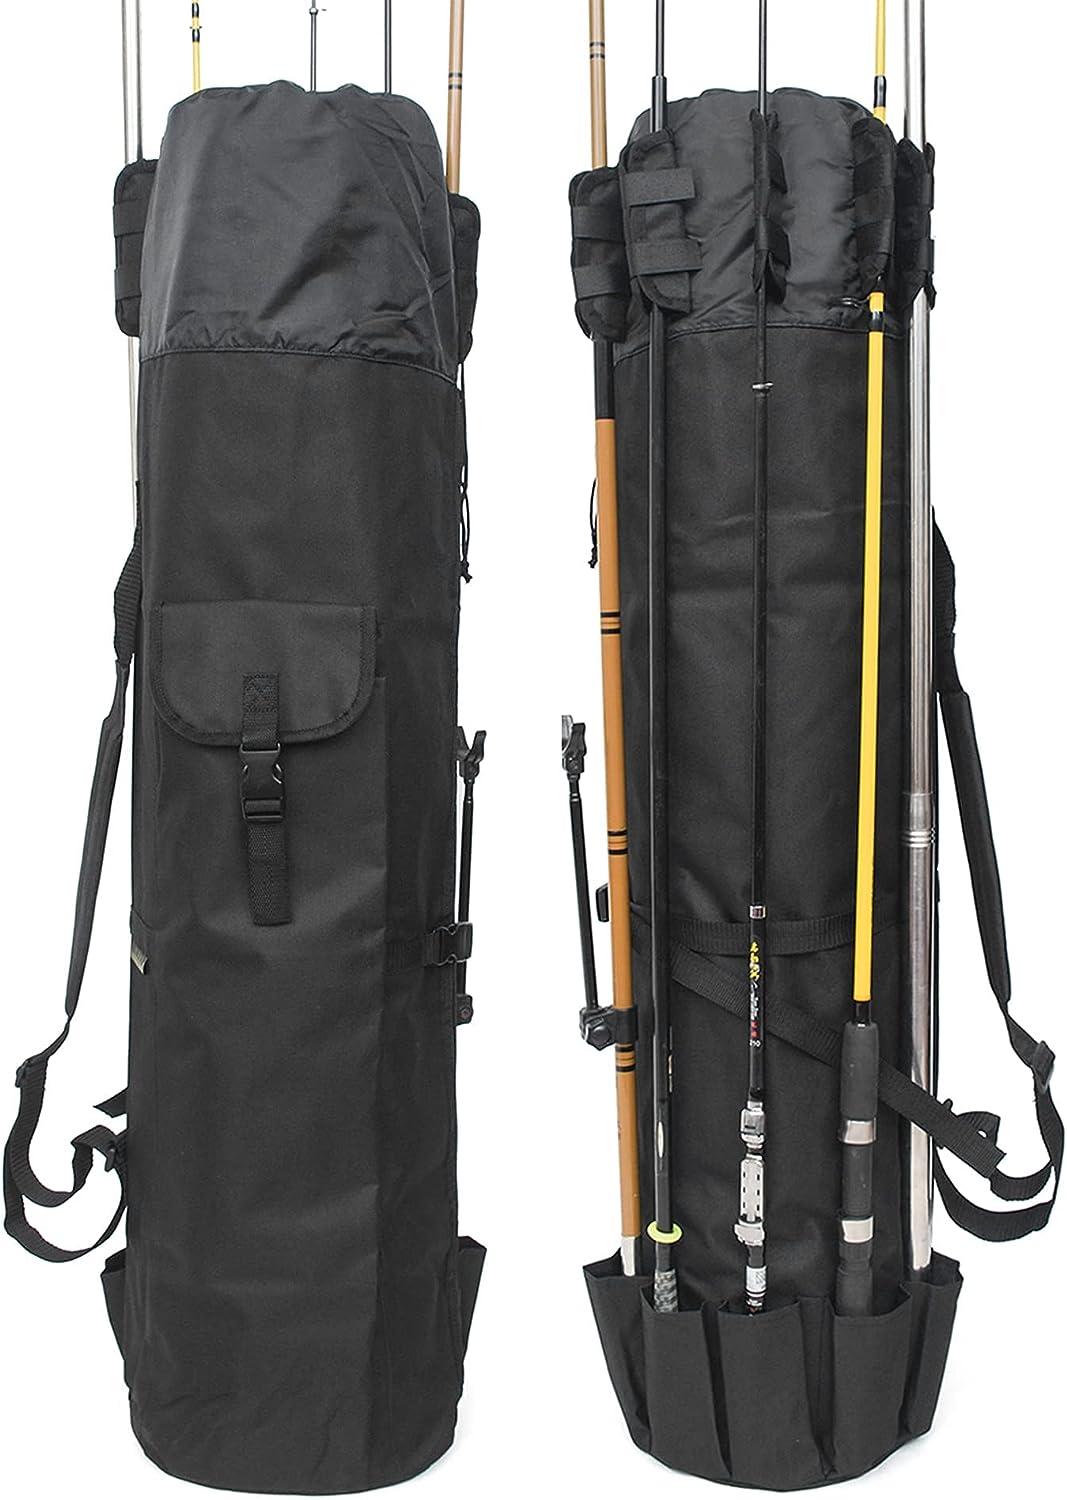 mydays Fishing Rod Bag,Fishing Reel Case,Pole Storage Bag Tackle Carrier Fishing  Gear and Equipment Holds 5 Poles & Tackle Black